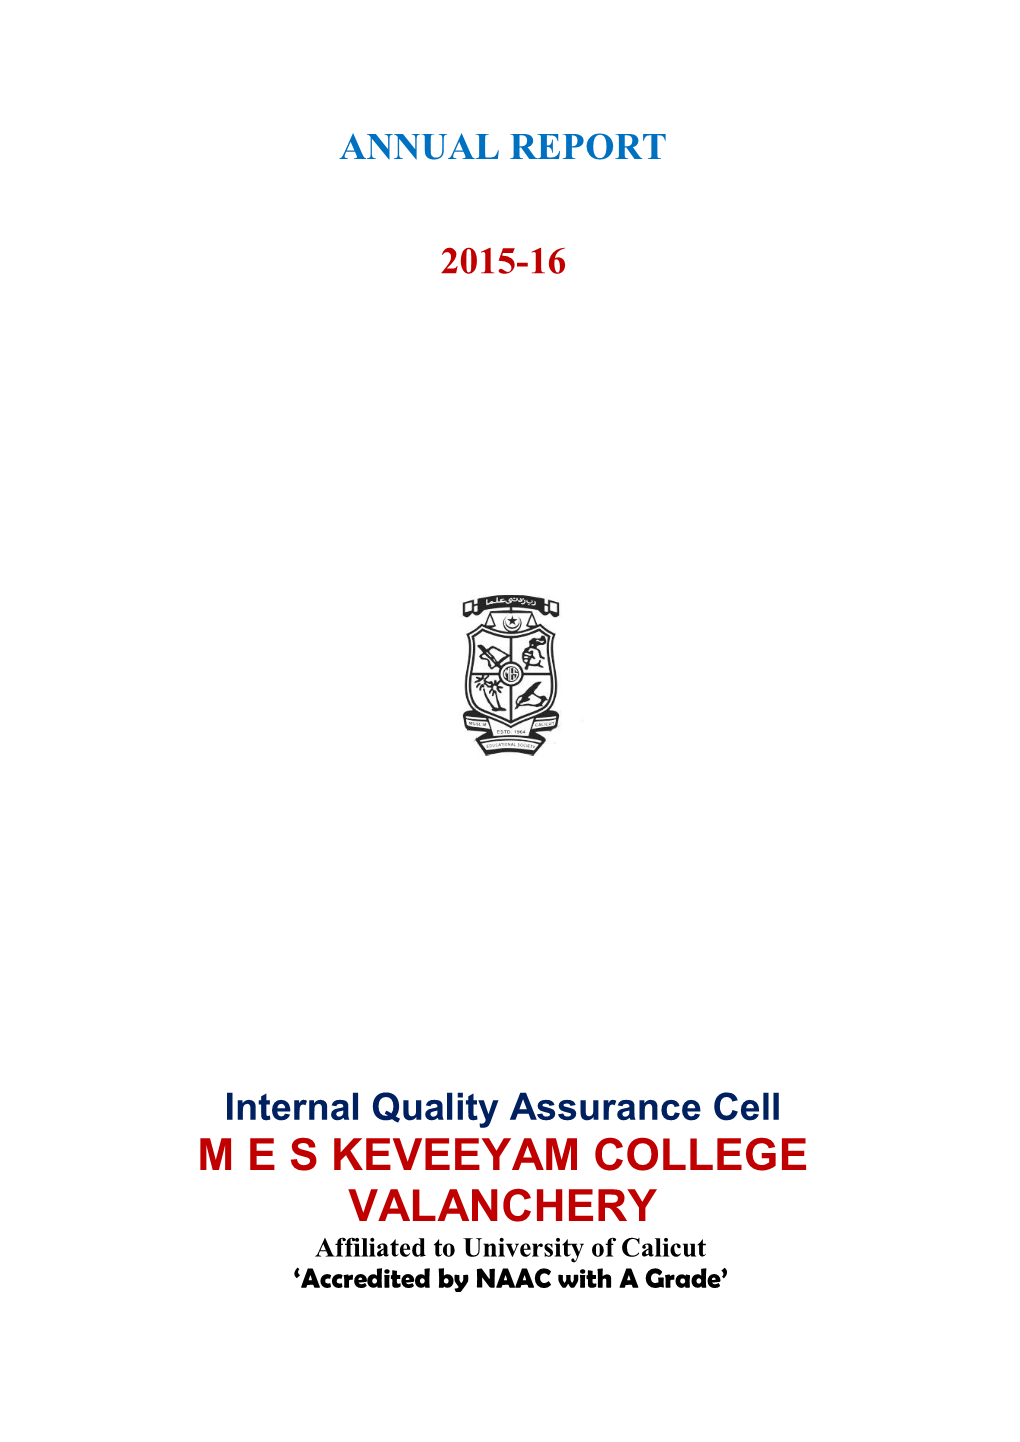 M E S KEVEEYAM COLLEGE VALANCHERY Affiliated to University of Calicut ‘Accredited by NAAC with a Grade’